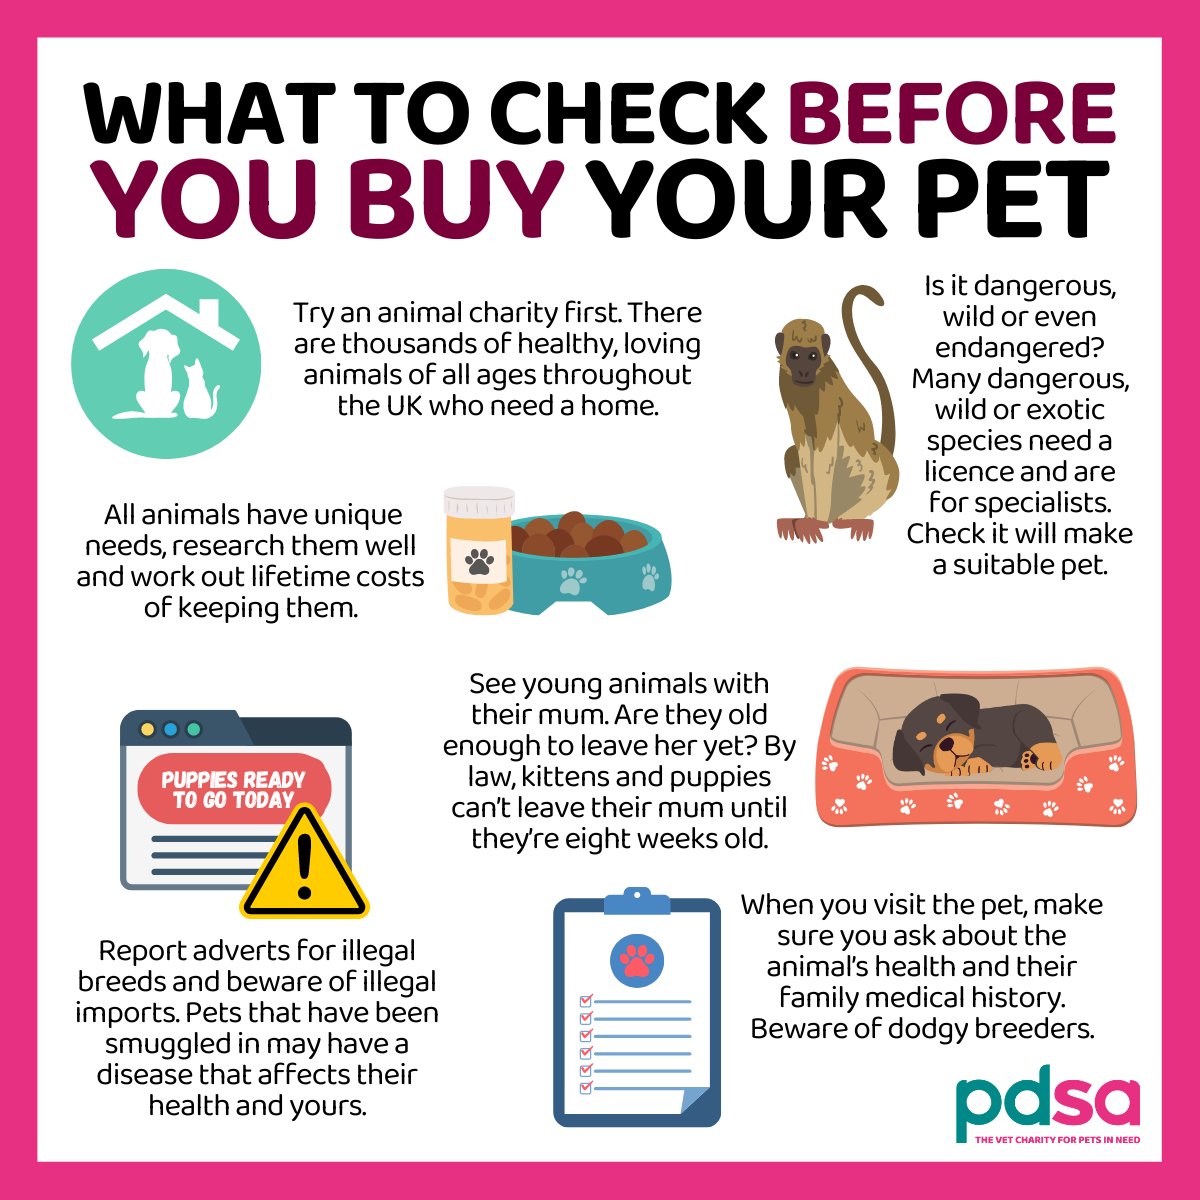 Would you know what to check before buying your pet? ⚠️ There are some steps to take and important checks to carry out before you make any impulse decisions 👇 Find out more here: pdsa.me/bZWP #PetsAdvertisingAdvisoryGroup #Pets